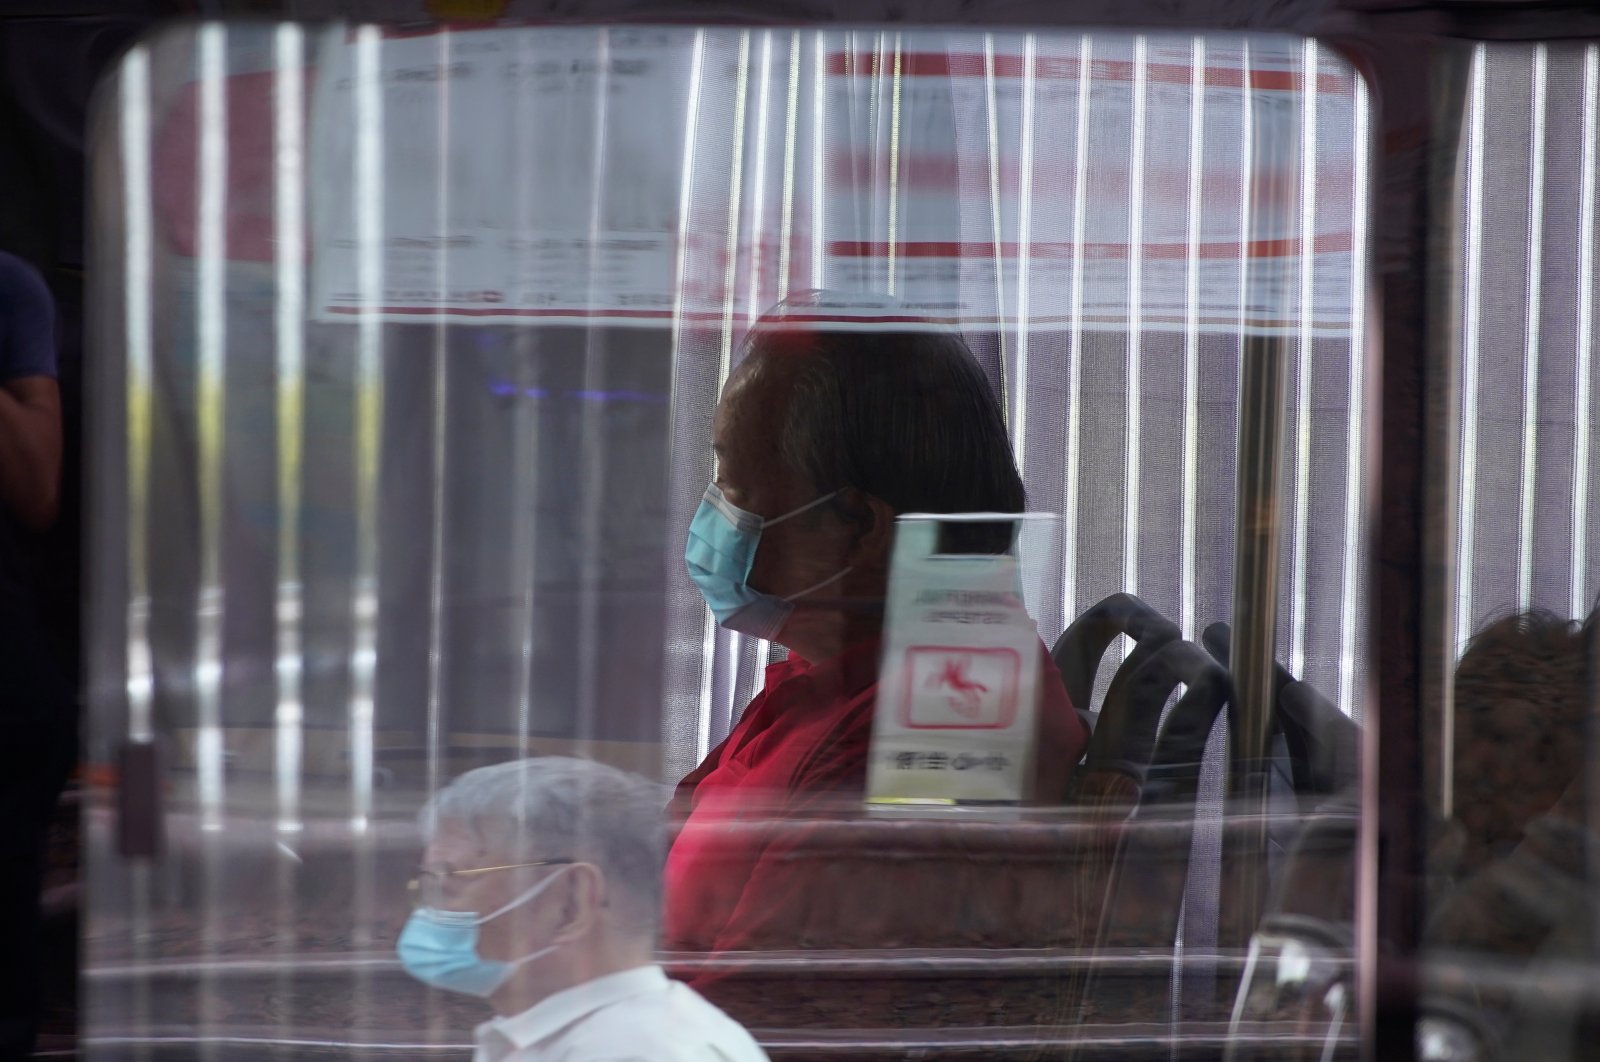 A man wearing a face mask sits on a bus amid the coronavirus disease (COVID-19) outbreak, in Shanghai, China, Aug. 27, 2020. (Reuters Photo)